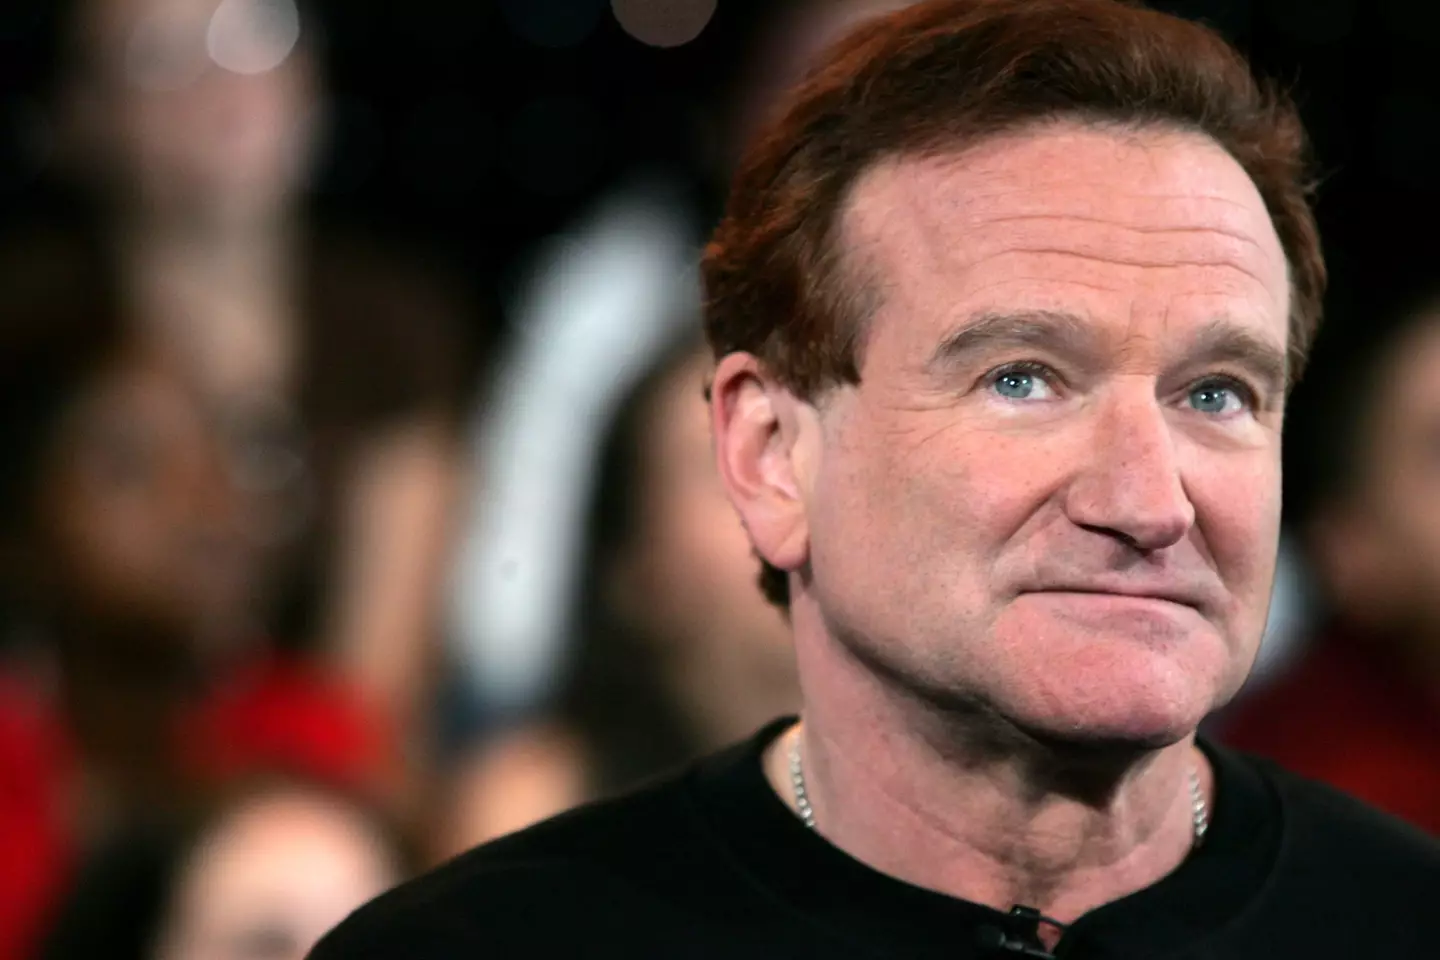 Friends claim that Robin Williams struggled to perform without drugs.